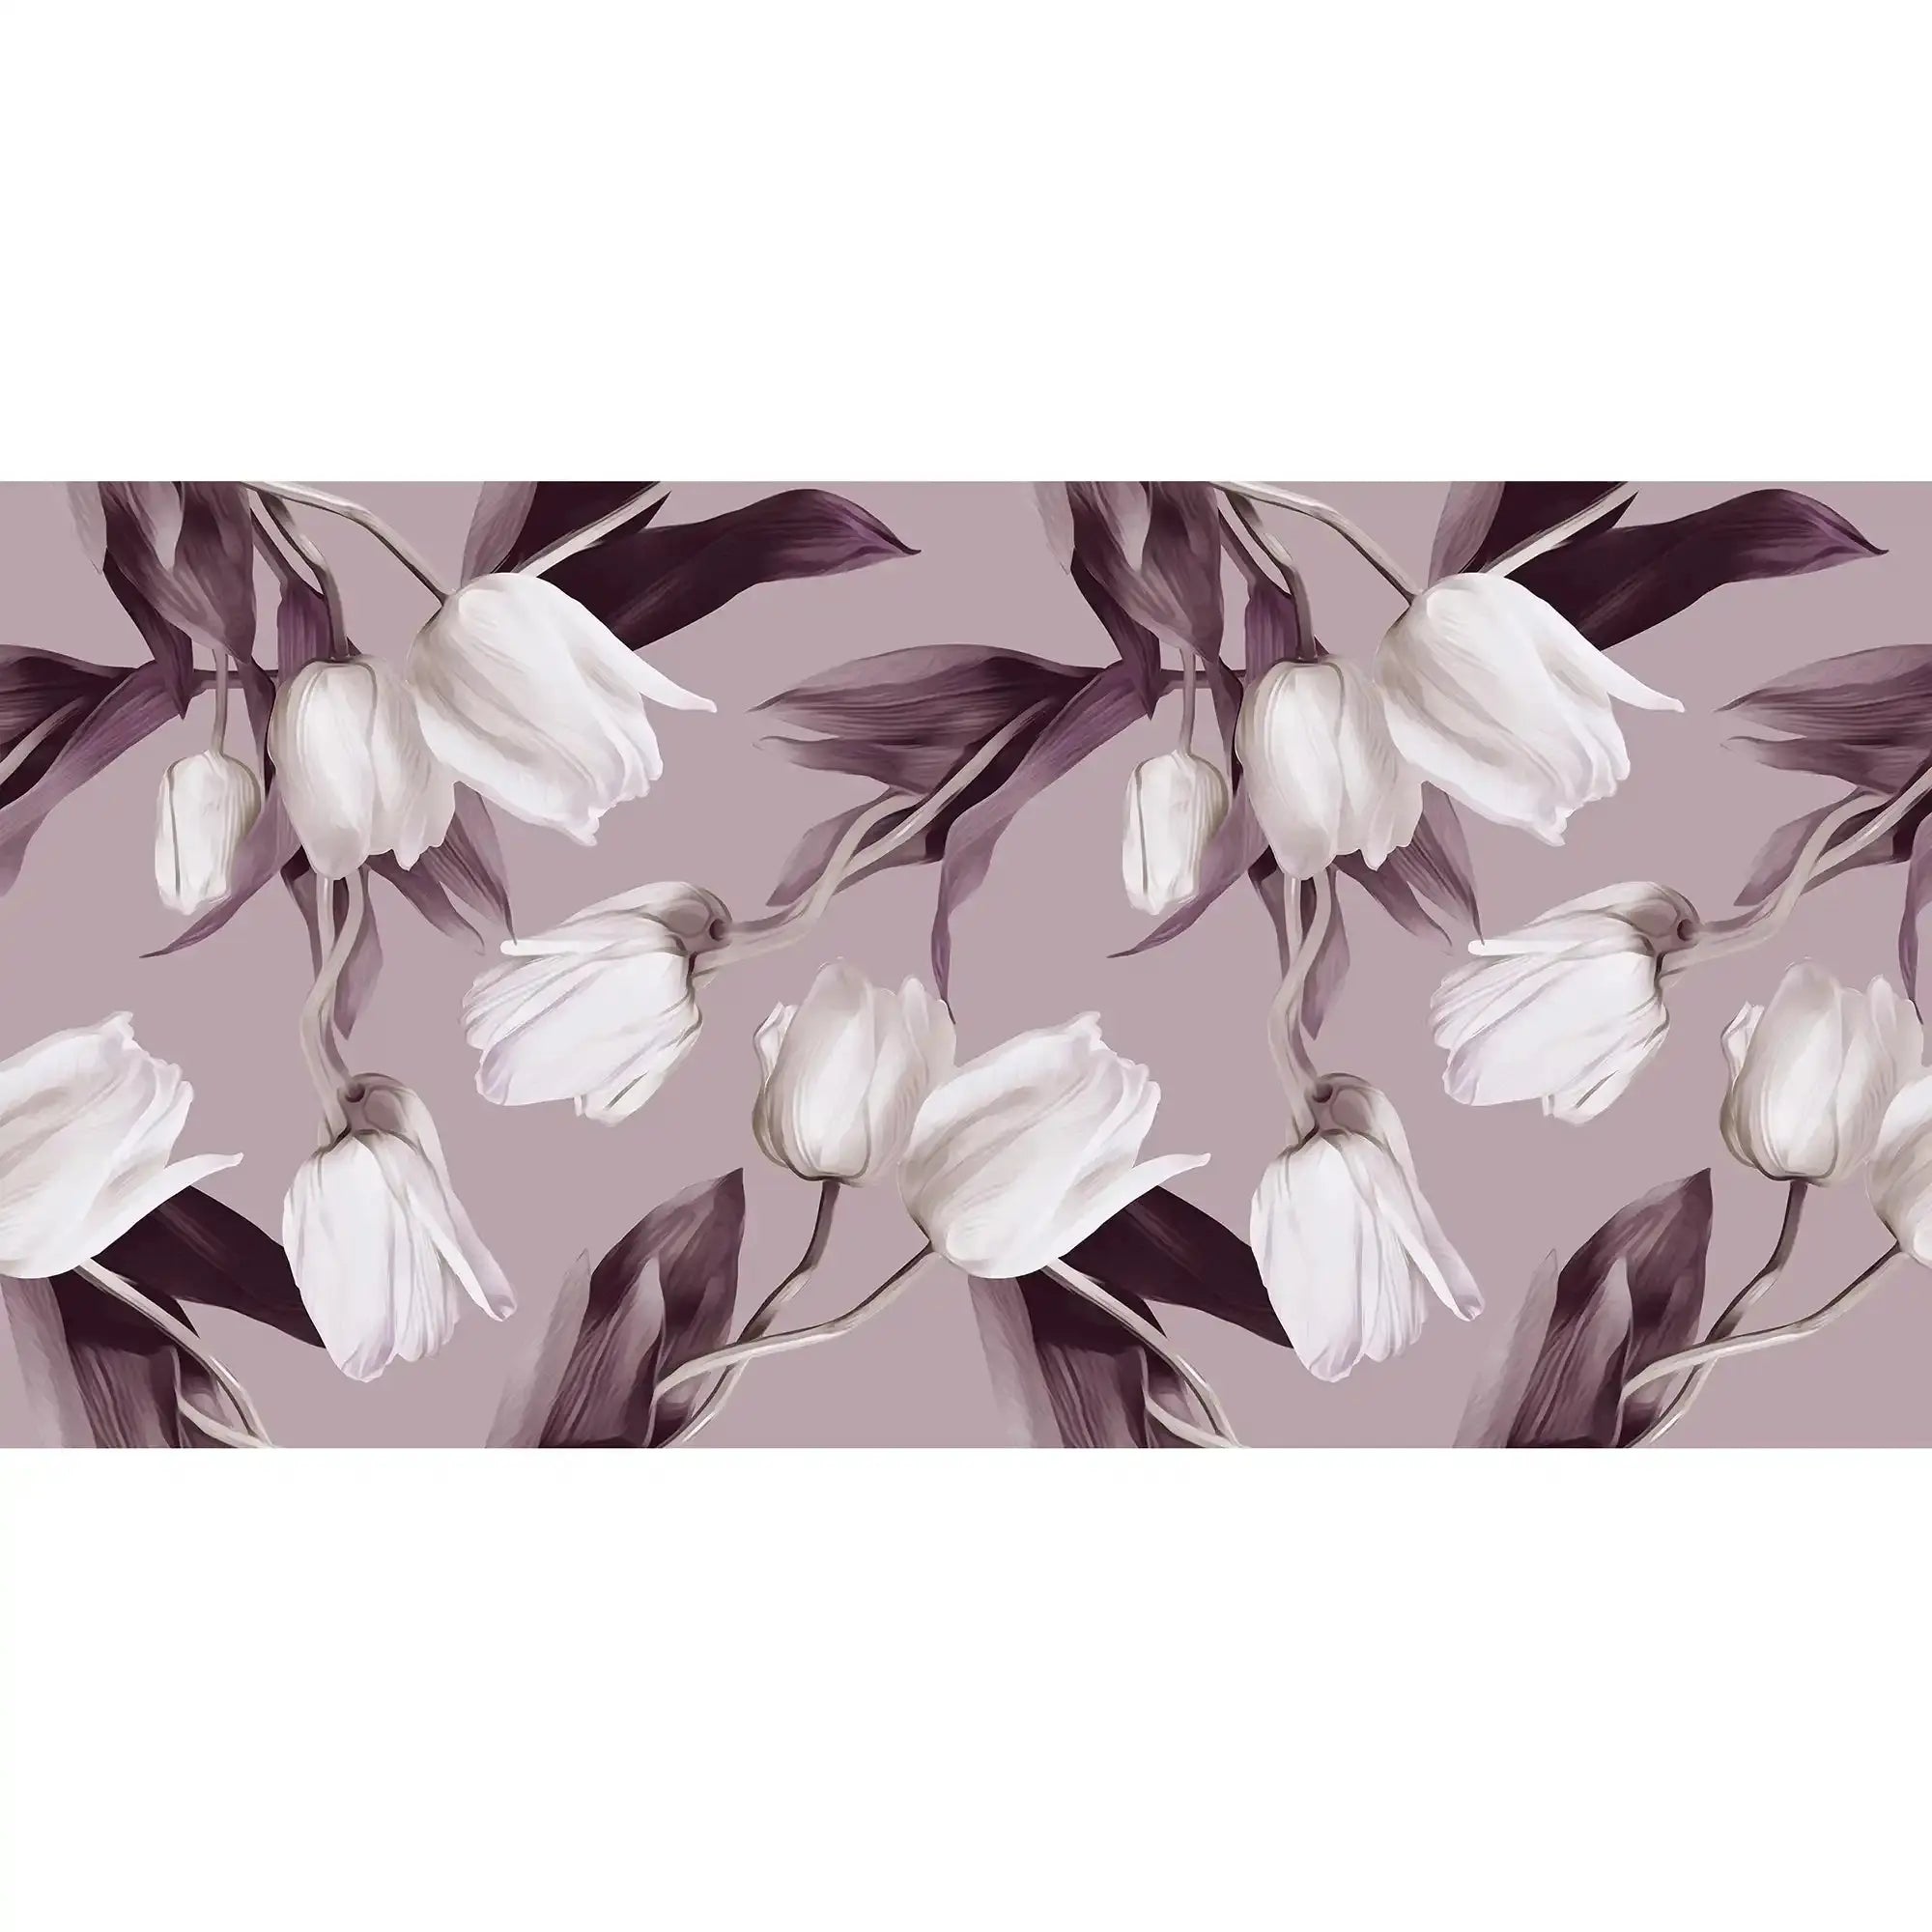 3094-D / Abstract Floral Peel and Stick Wallpaper, Tulips Modern Design Mural for Walls - Artevella